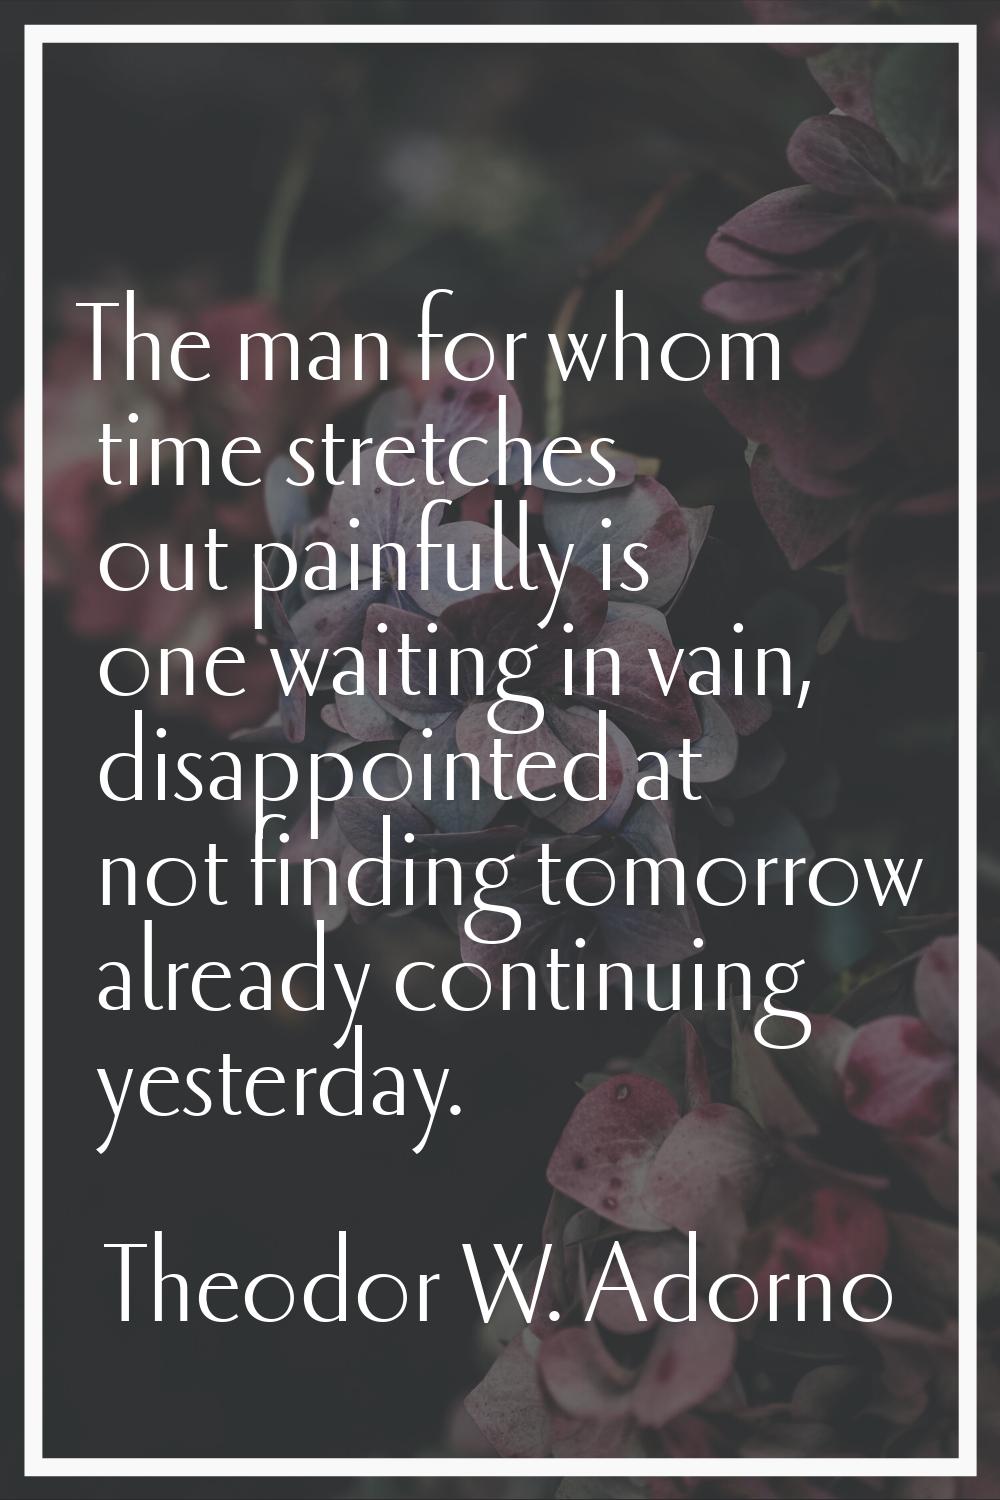 The man for whom time stretches out painfully is one waiting in vain, disappointed at not finding t